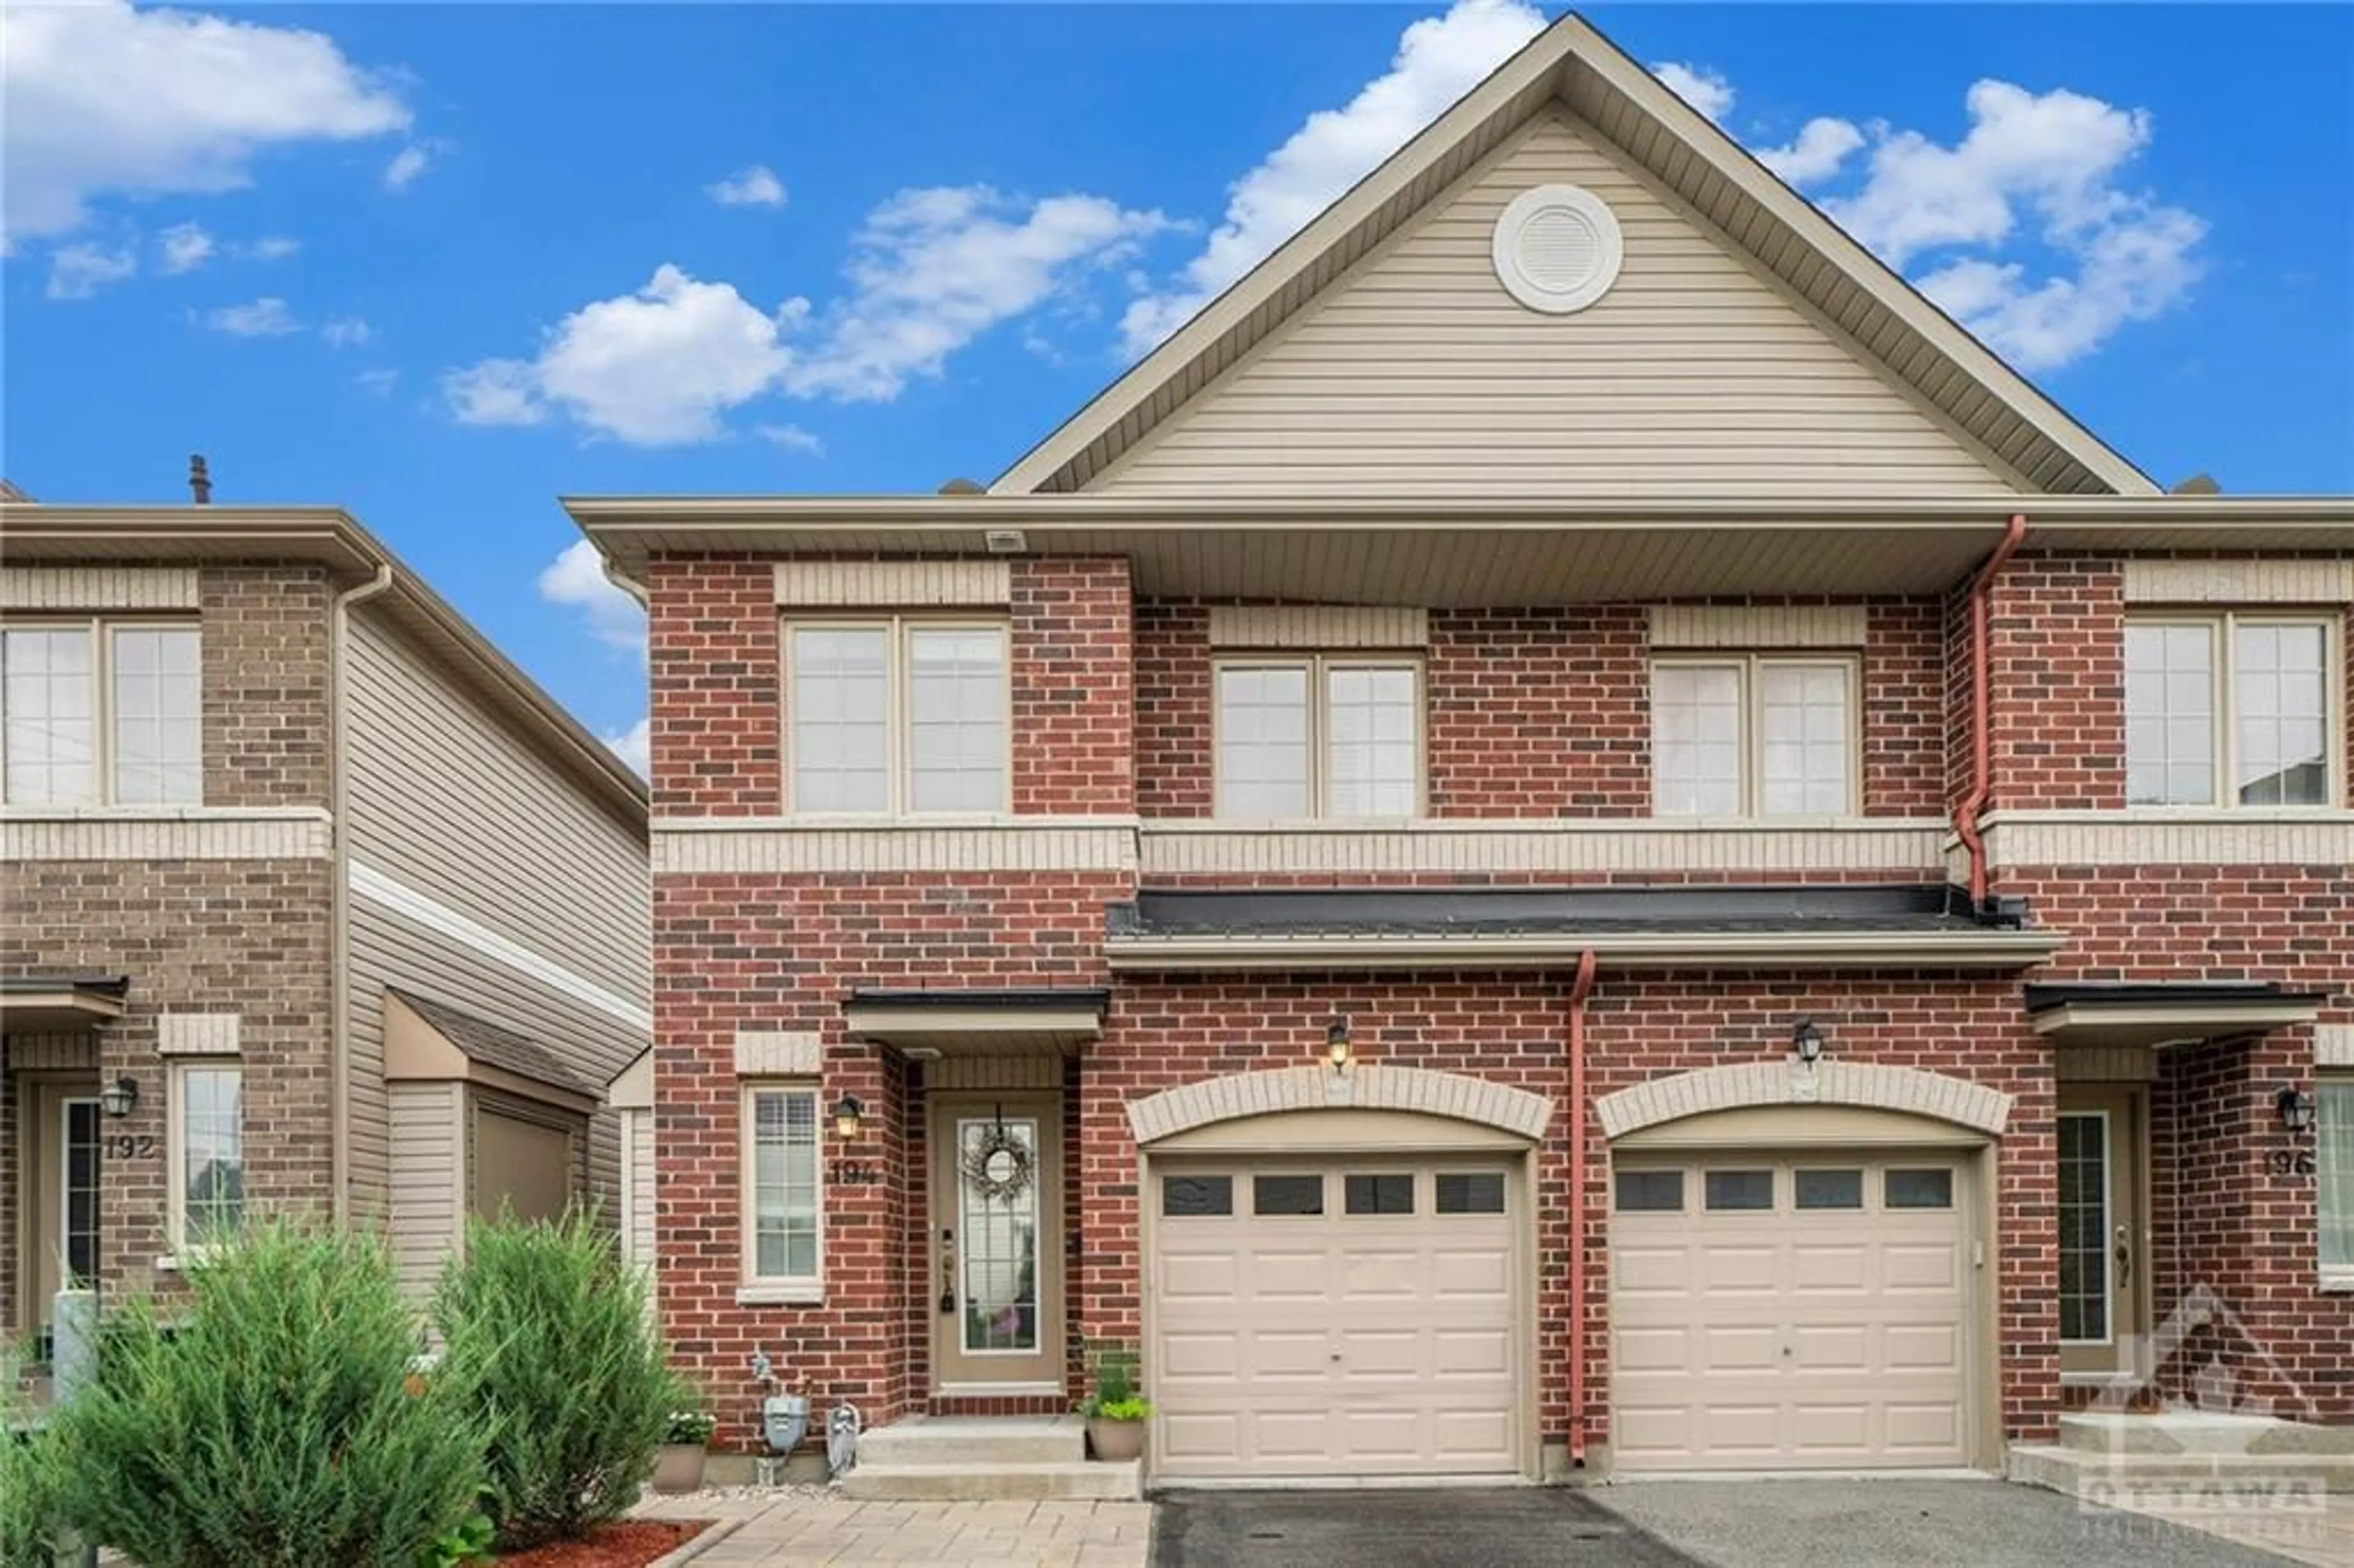 Home with brick exterior material for 194 CAMDEN Pvt, Ottawa Ontario K2J 4S2